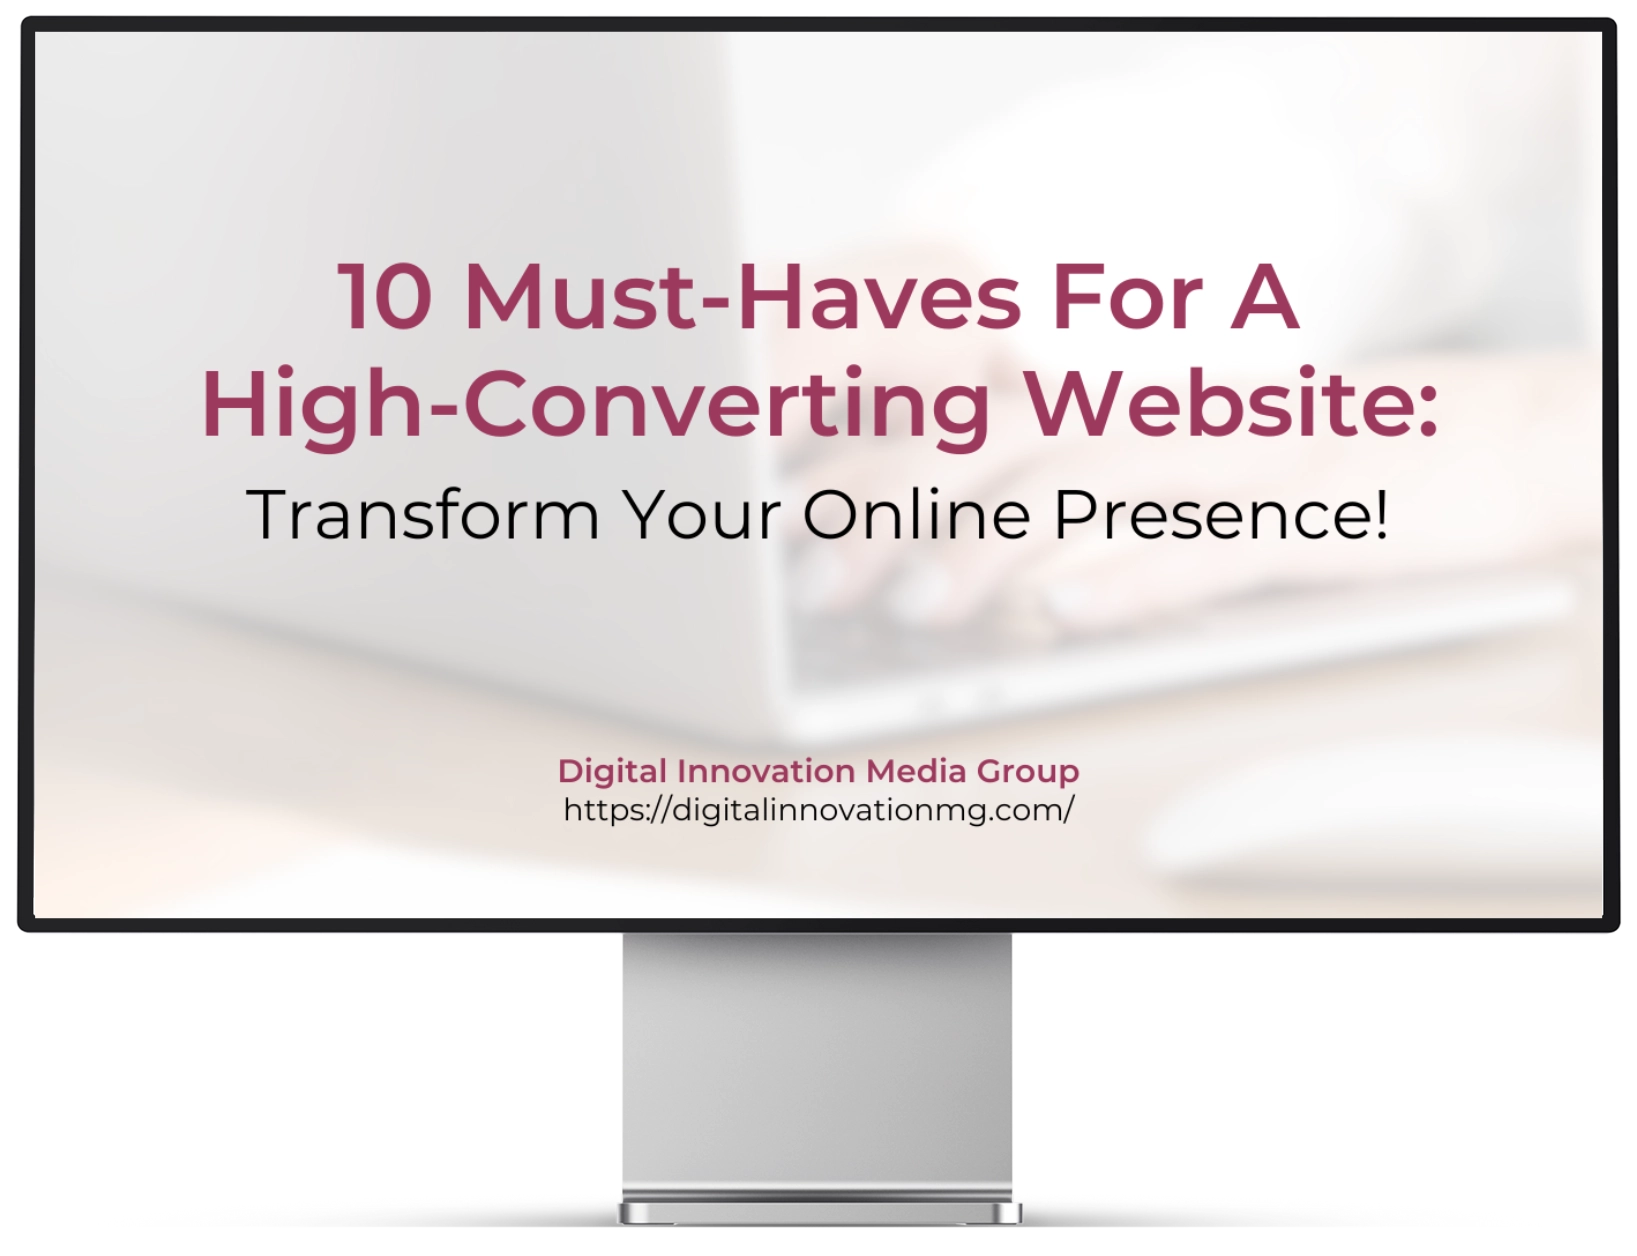 10 Must Have For A High Converting Website - Lead Magnet DIMG Charique Digital Innovation updated